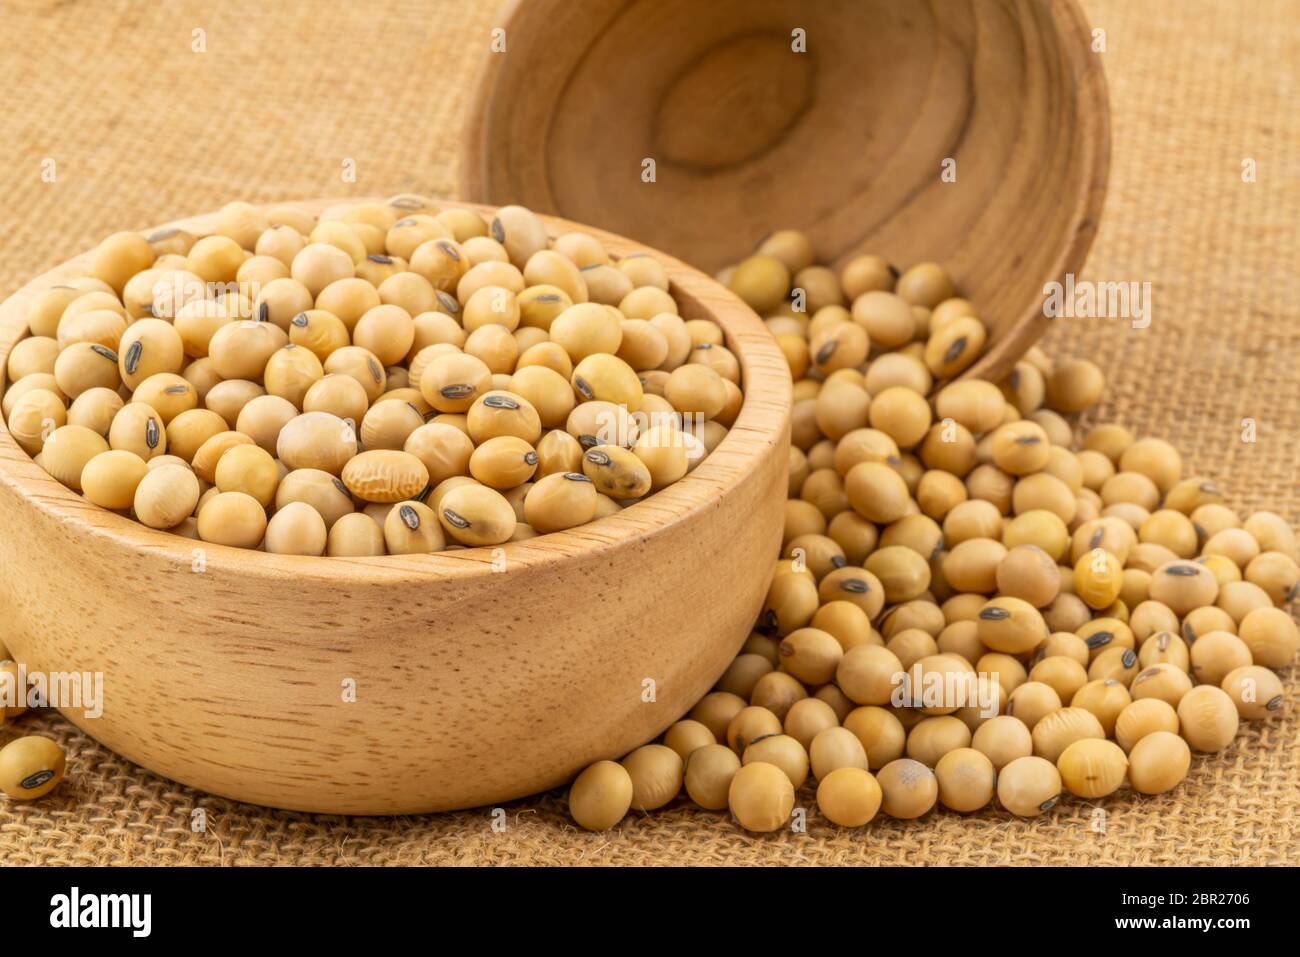 Soy beans in a wooden bowl with a  pile of soy beans on sackcloth Stock Photo